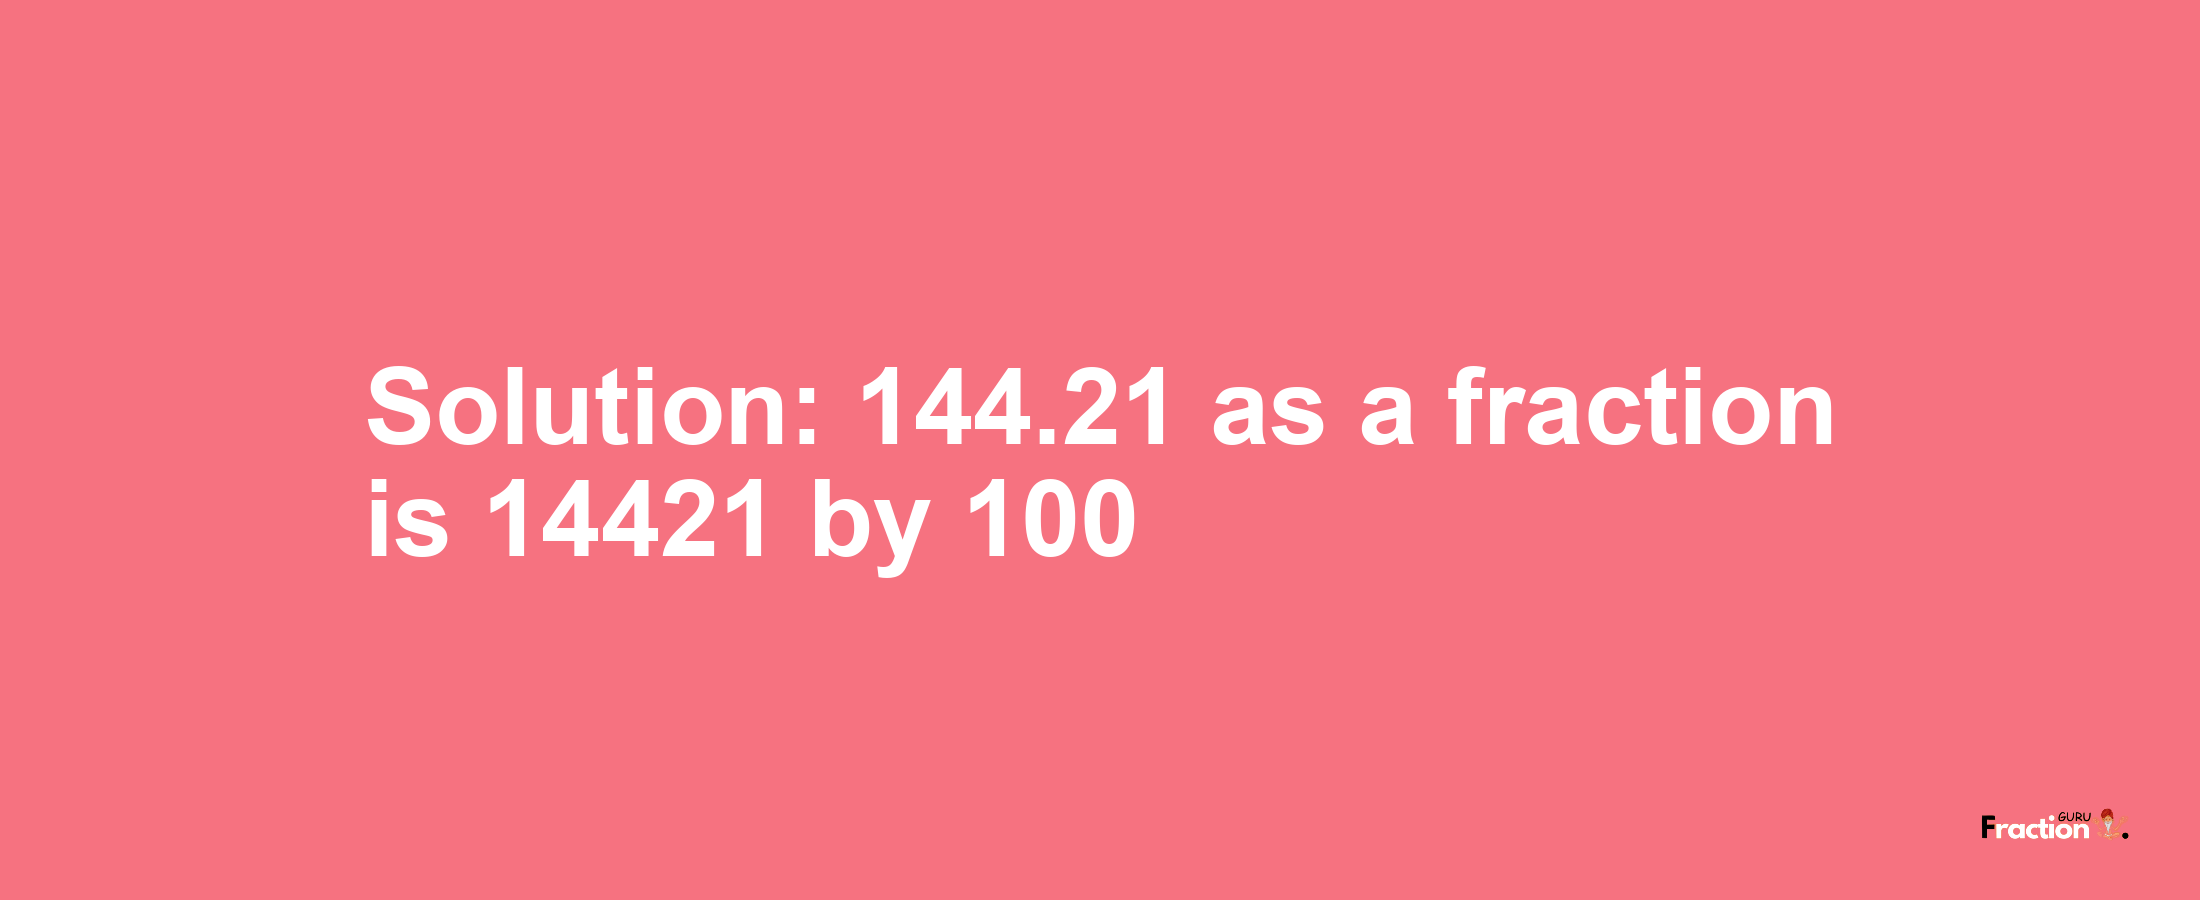 Solution:144.21 as a fraction is 14421/100